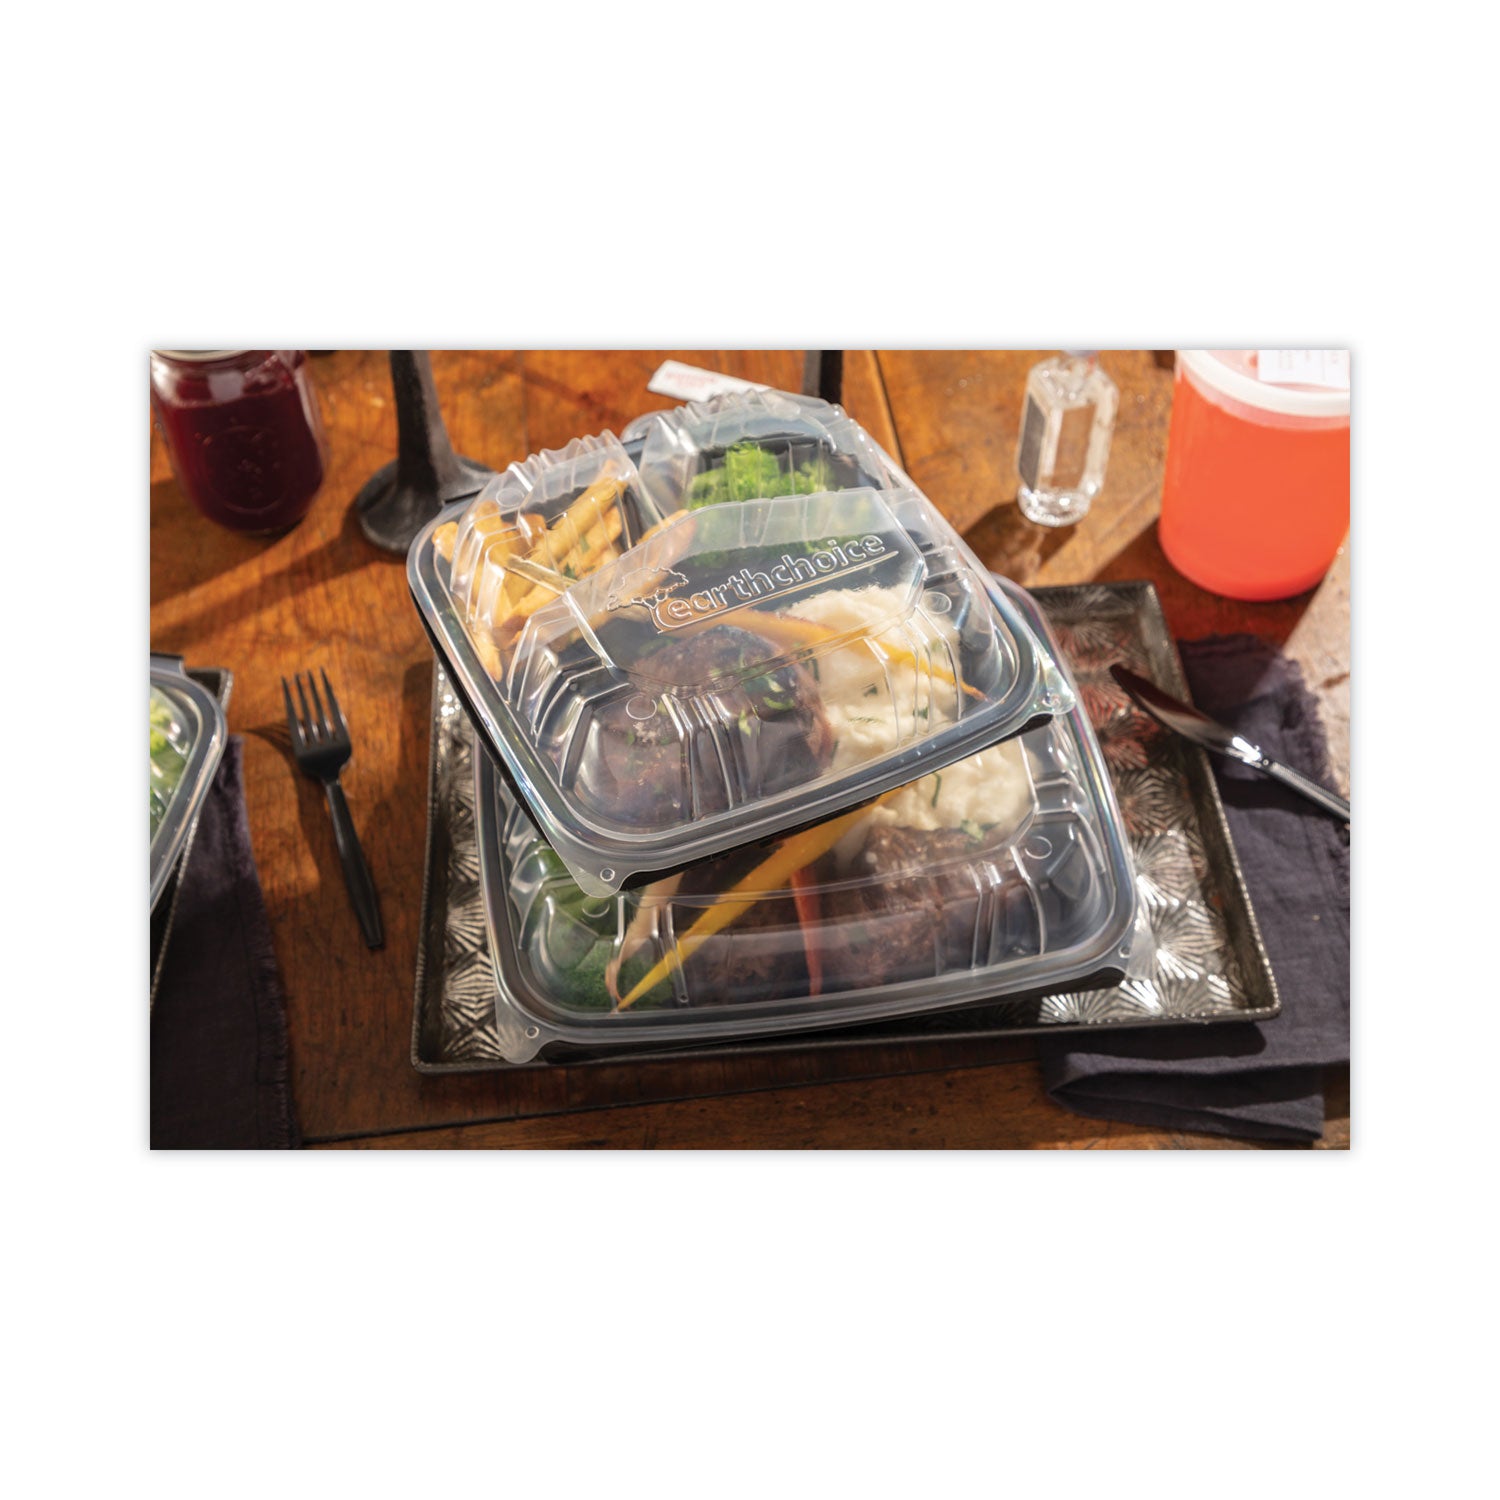 earthchoice-vented-dual-color-microwavable-hinged-lid-container-3-comp-base-lid-34-oz-105x95x3-blk-clr-plastic-132-ct_pctdc109330b000 - 7